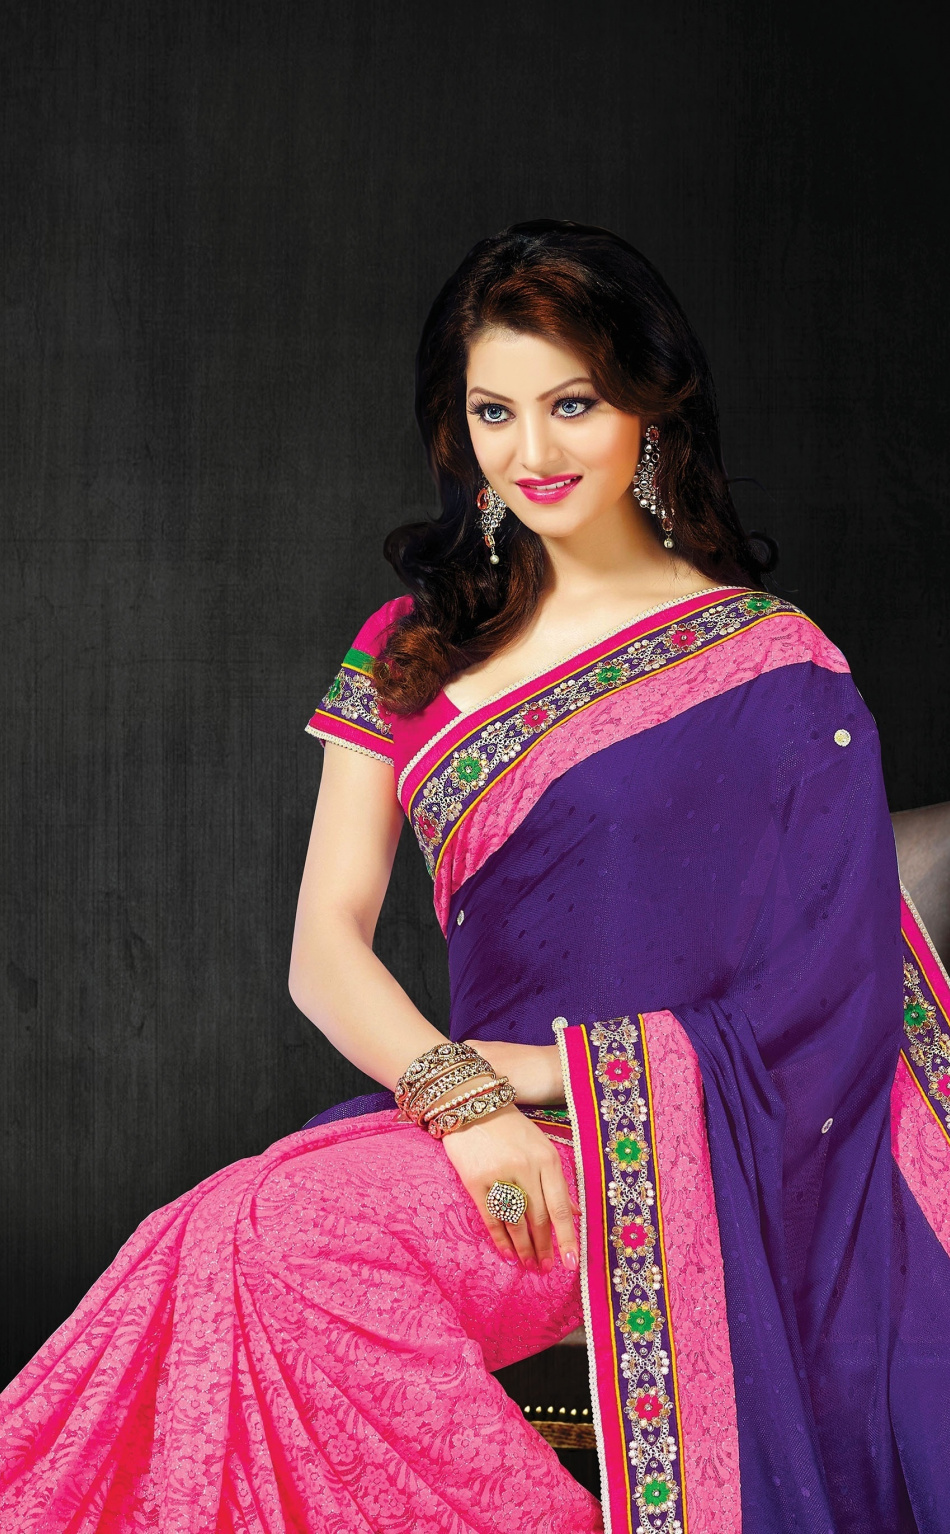 Wallpaper Urvashi Rautela Indian Celebrity Saree Urvashi Rautela Hd Photos Download 179480 Hd Wallpaper Backgrounds Download She supported the save the cow campaign. urvashi rautela hd photos download